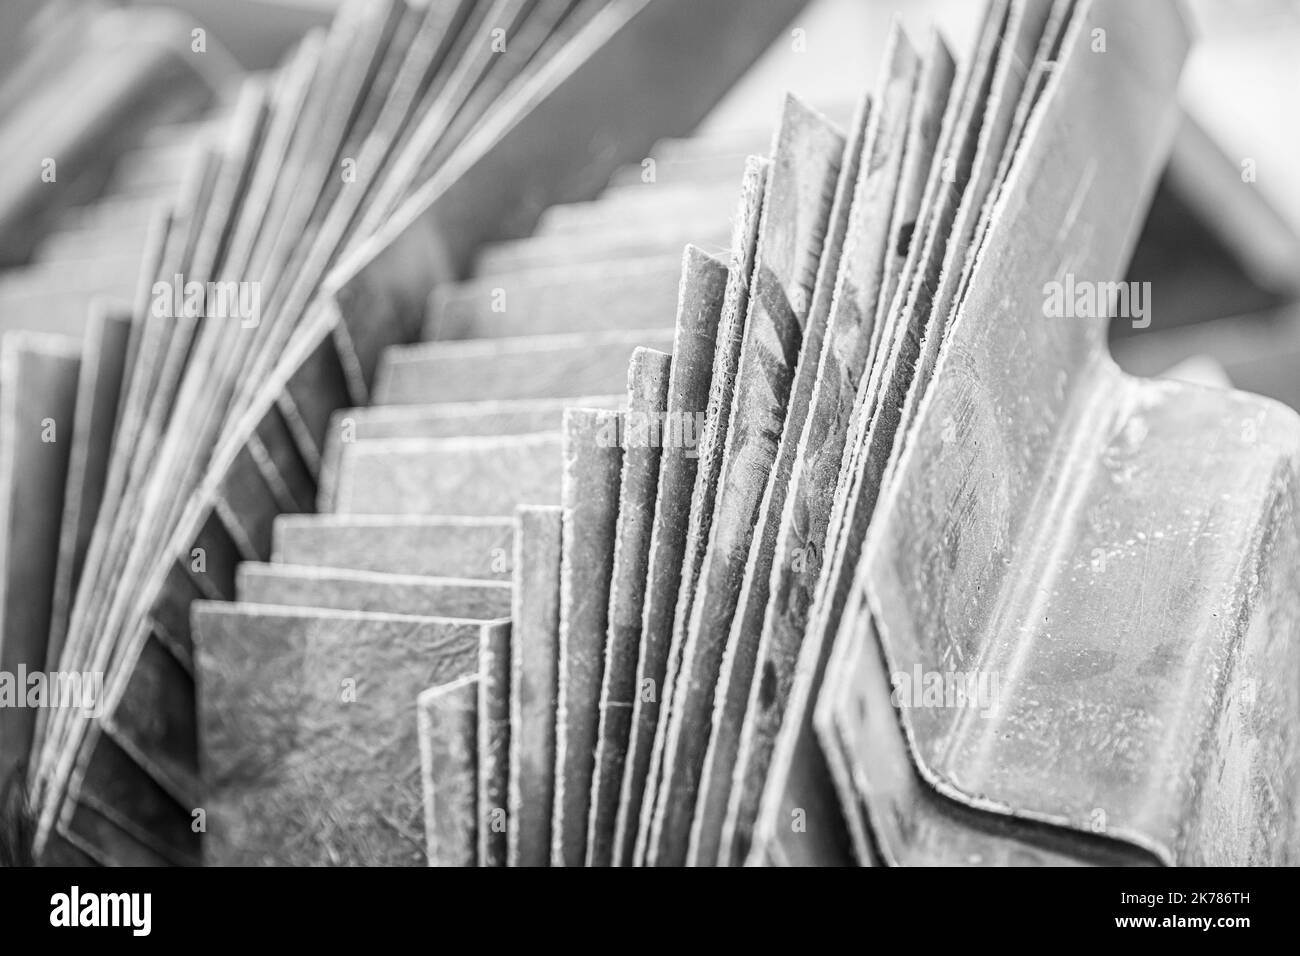 stacked objects forming shapes Stock Photo